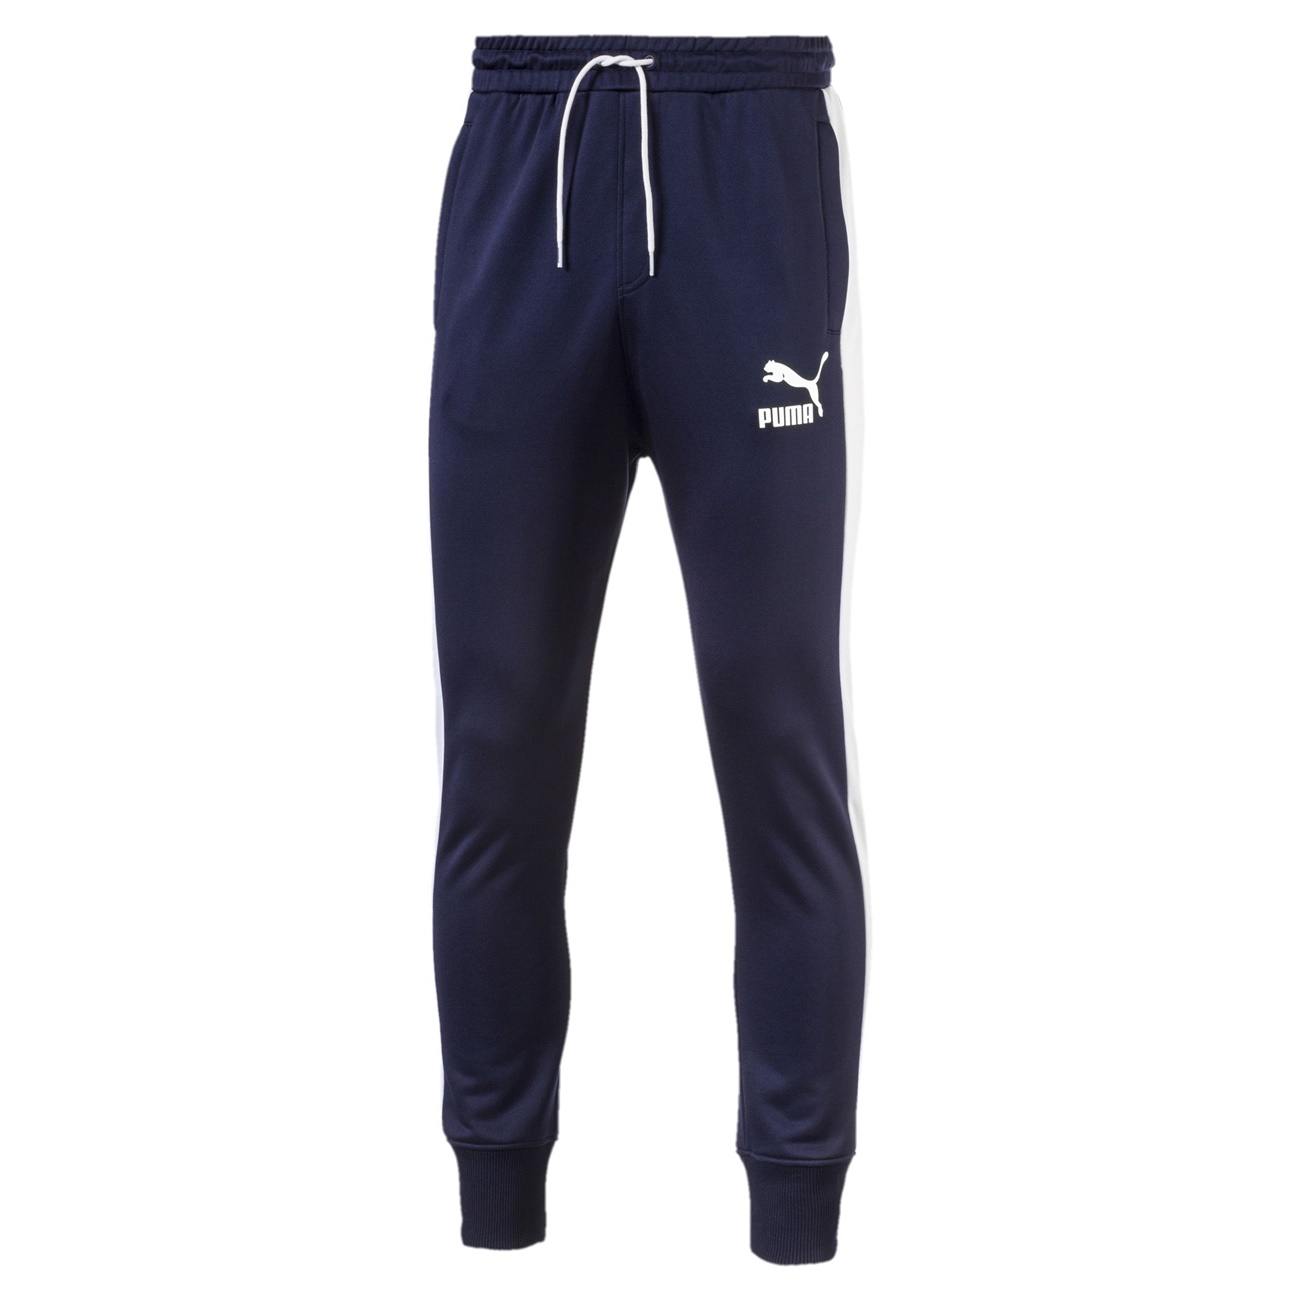 Archive Track Pants (Peacoat Navy)